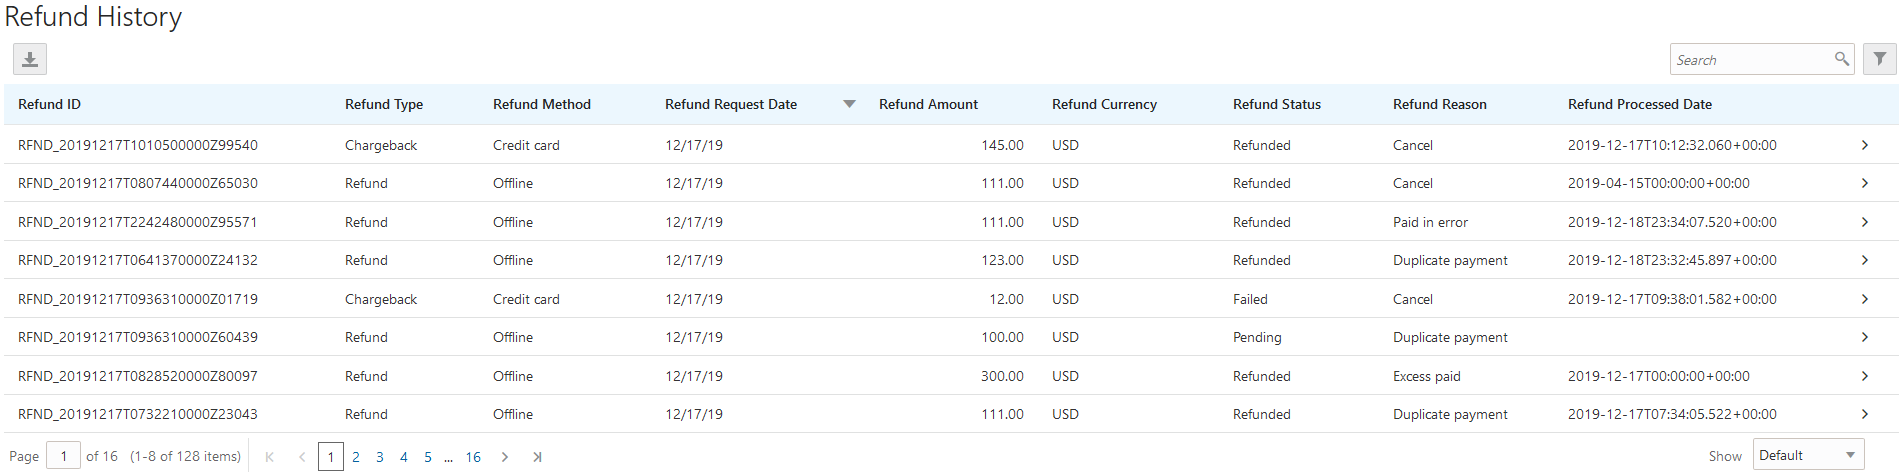 Example of the Refund History page